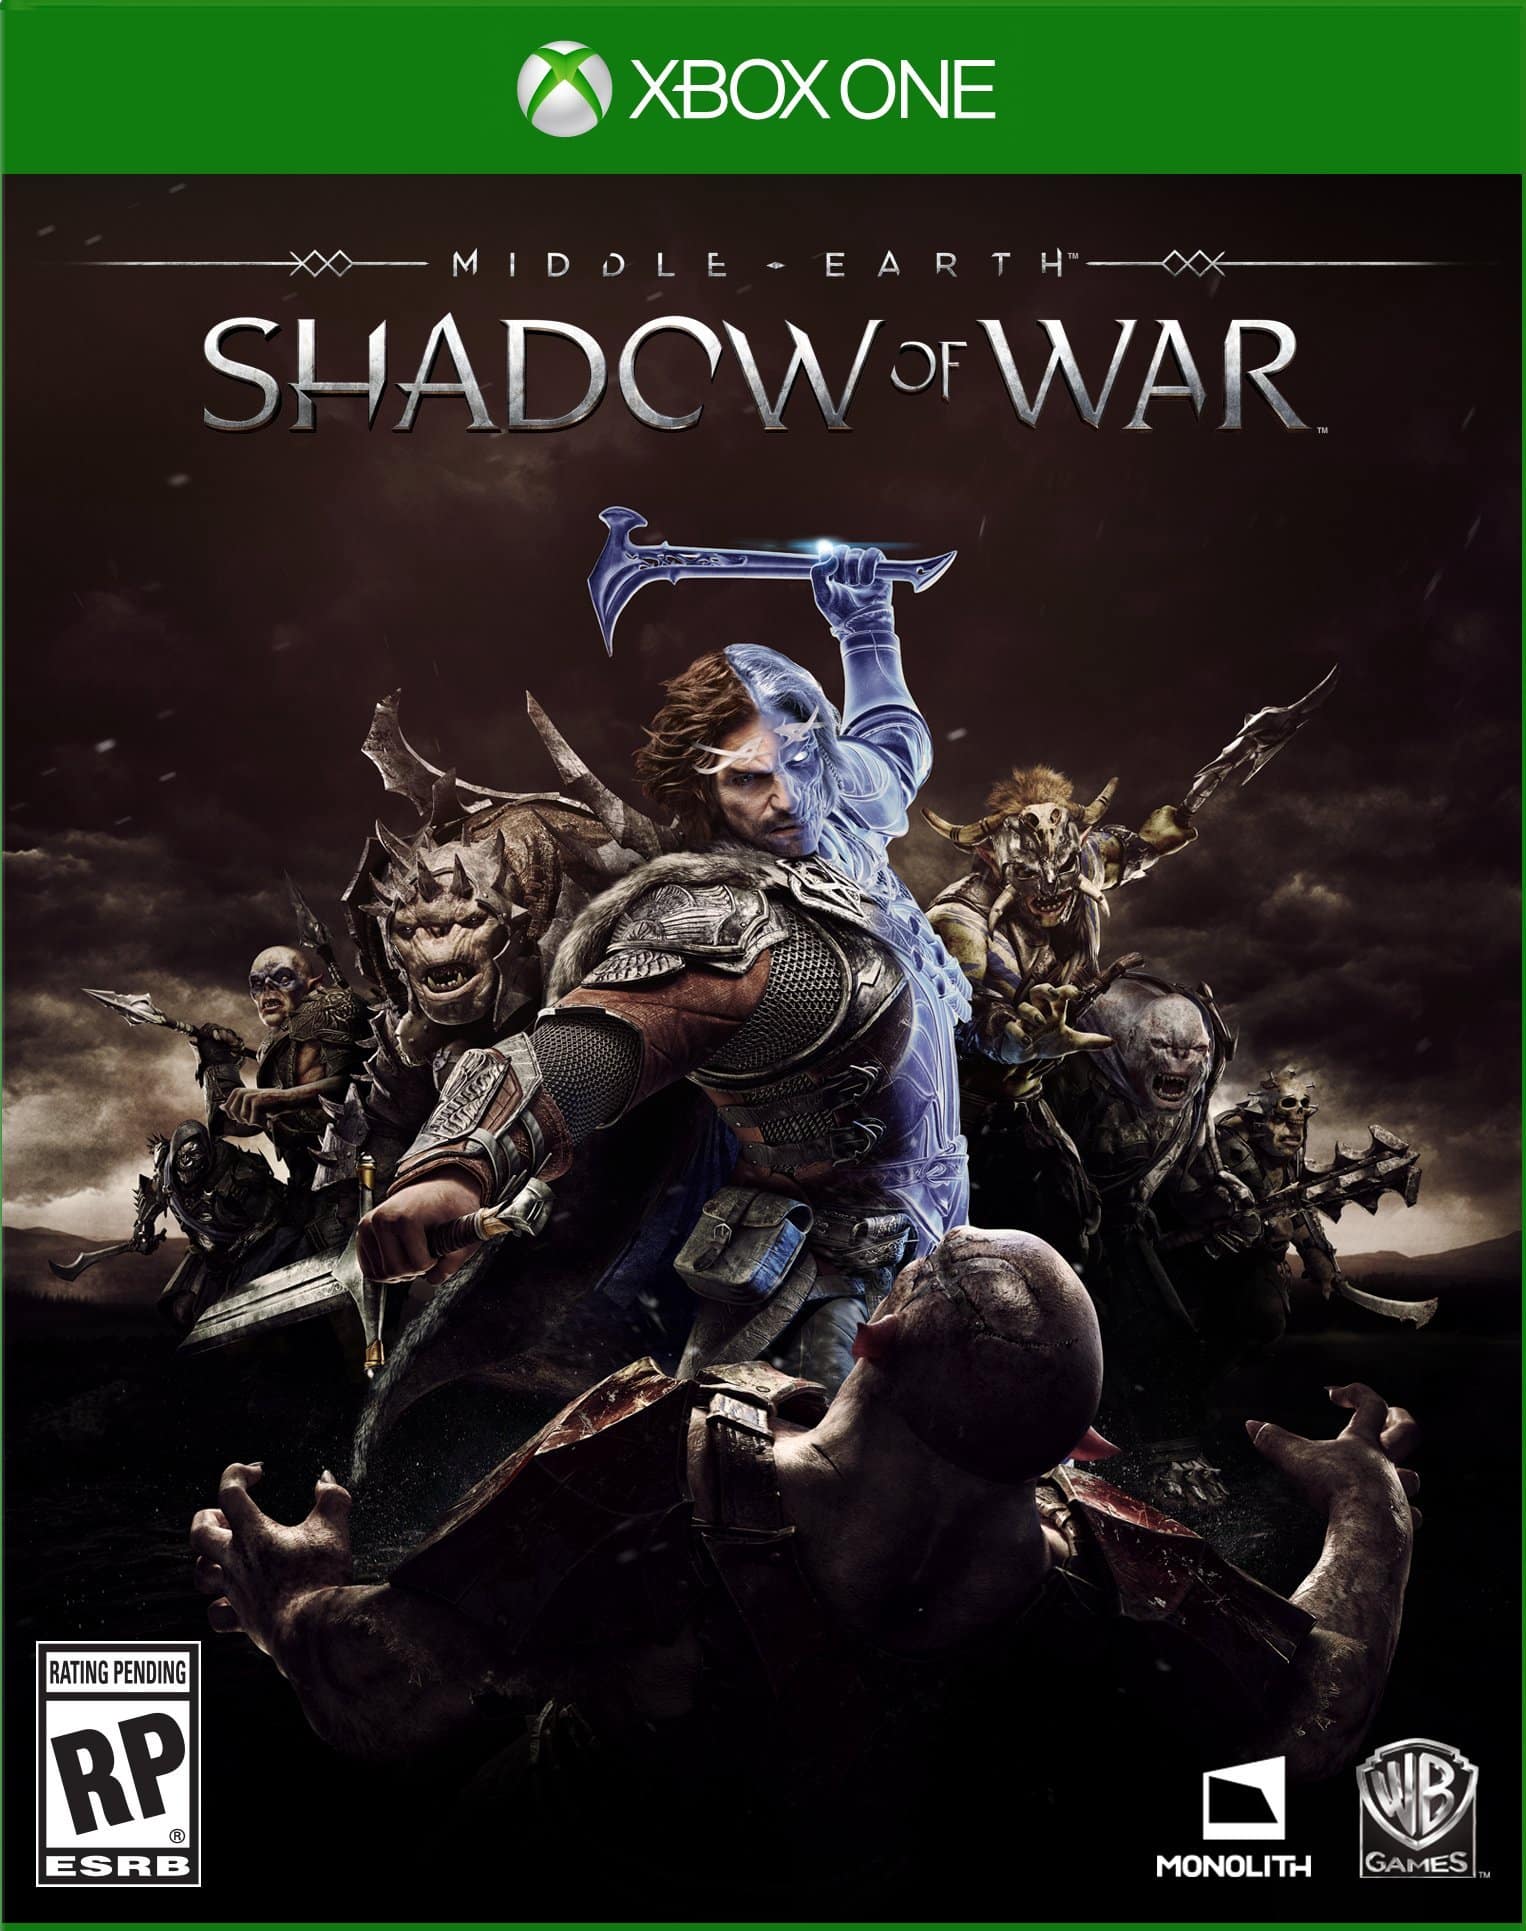 Middle-earth: Shadow of War Xbox One Box Art